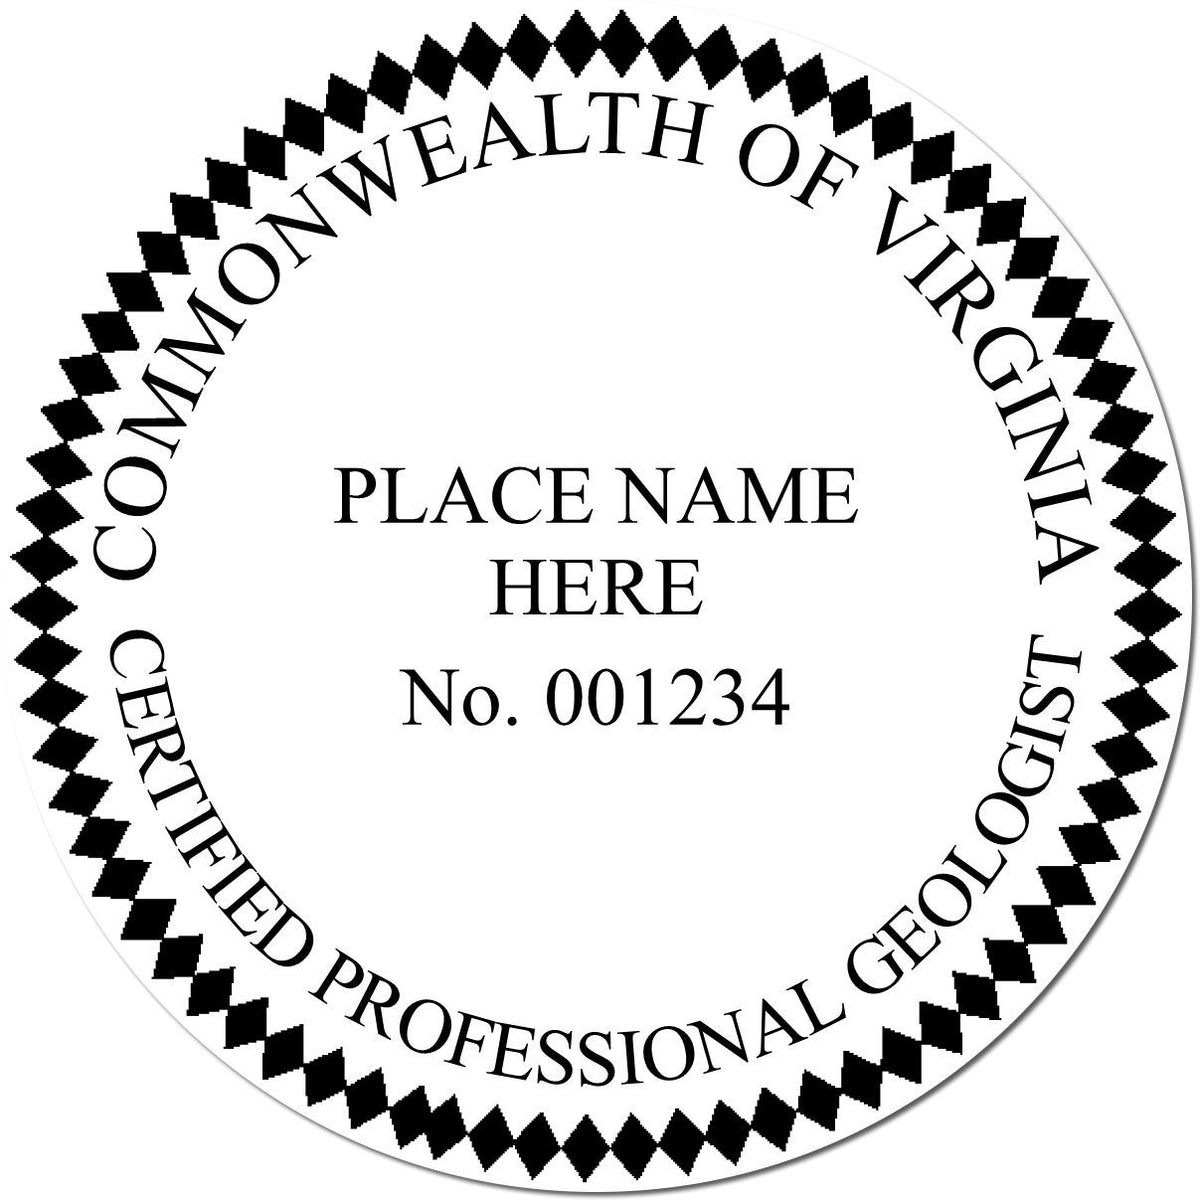 This paper is stamped with a sample imprint of the Slim Pre-Inked Virginia Professional Geologist Seal Stamp, signifying its quality and reliability.